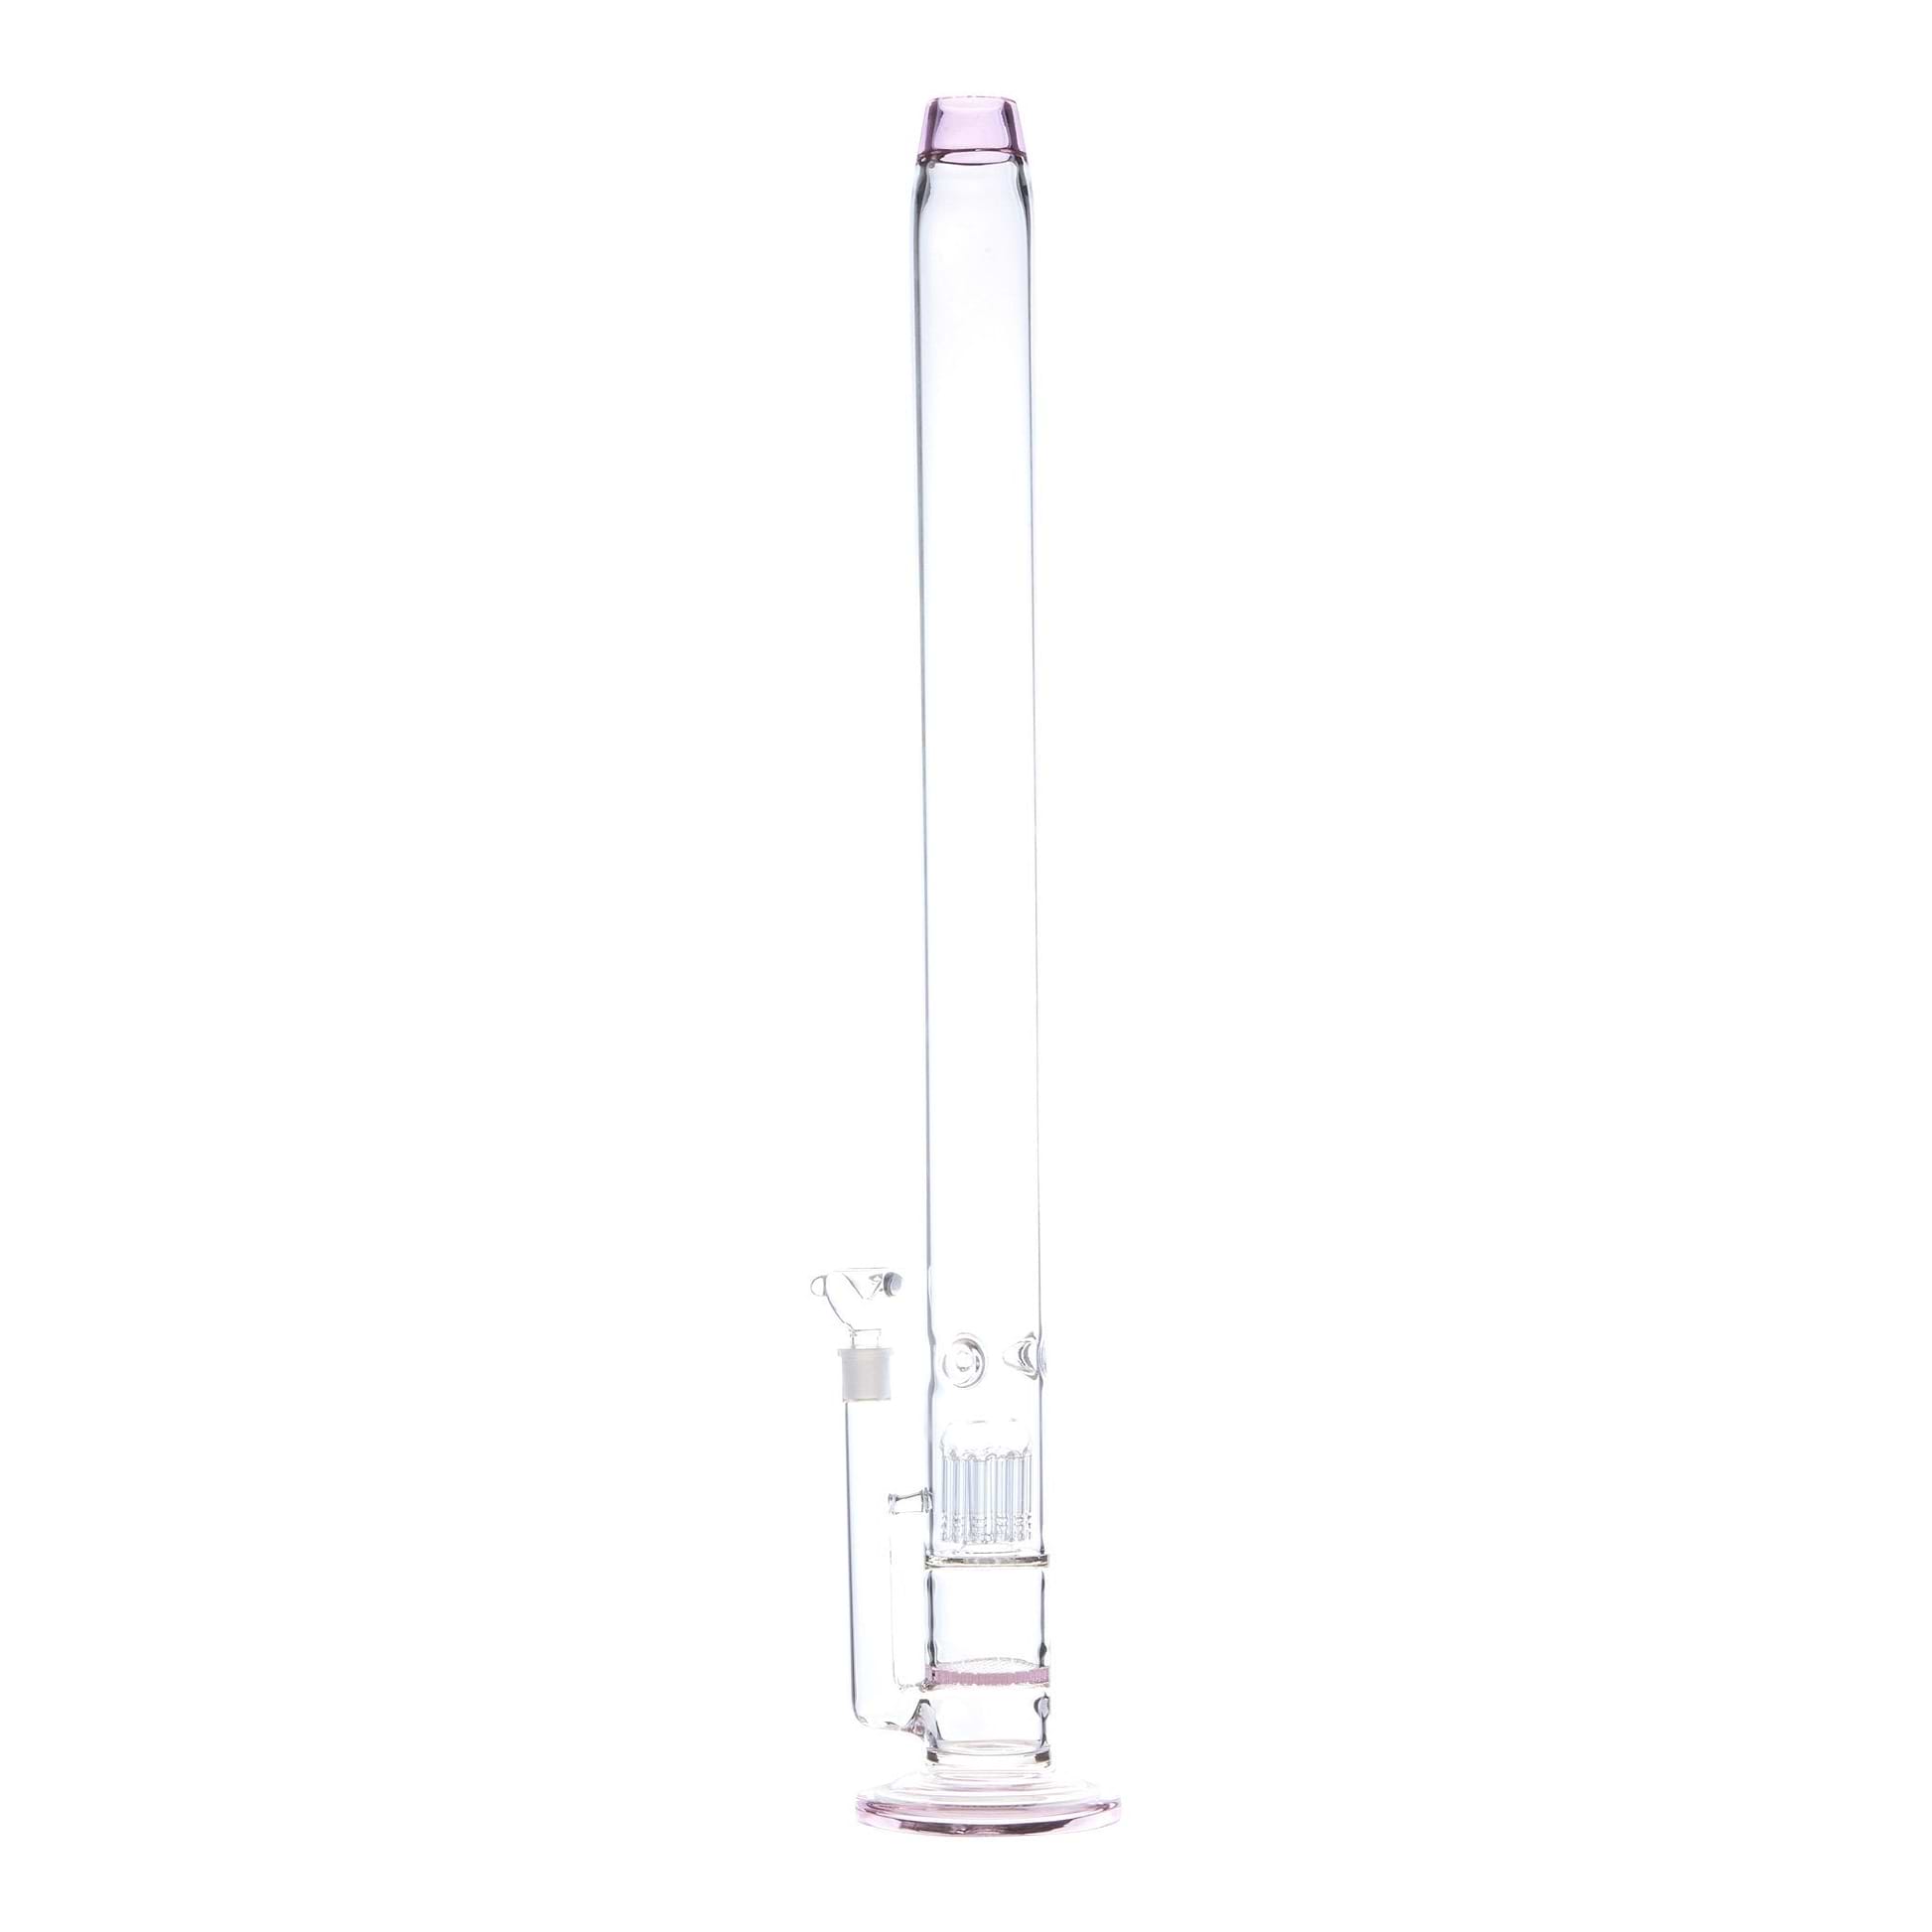 Full shot of straight glass bong smoking device with pink accents and bowl on left